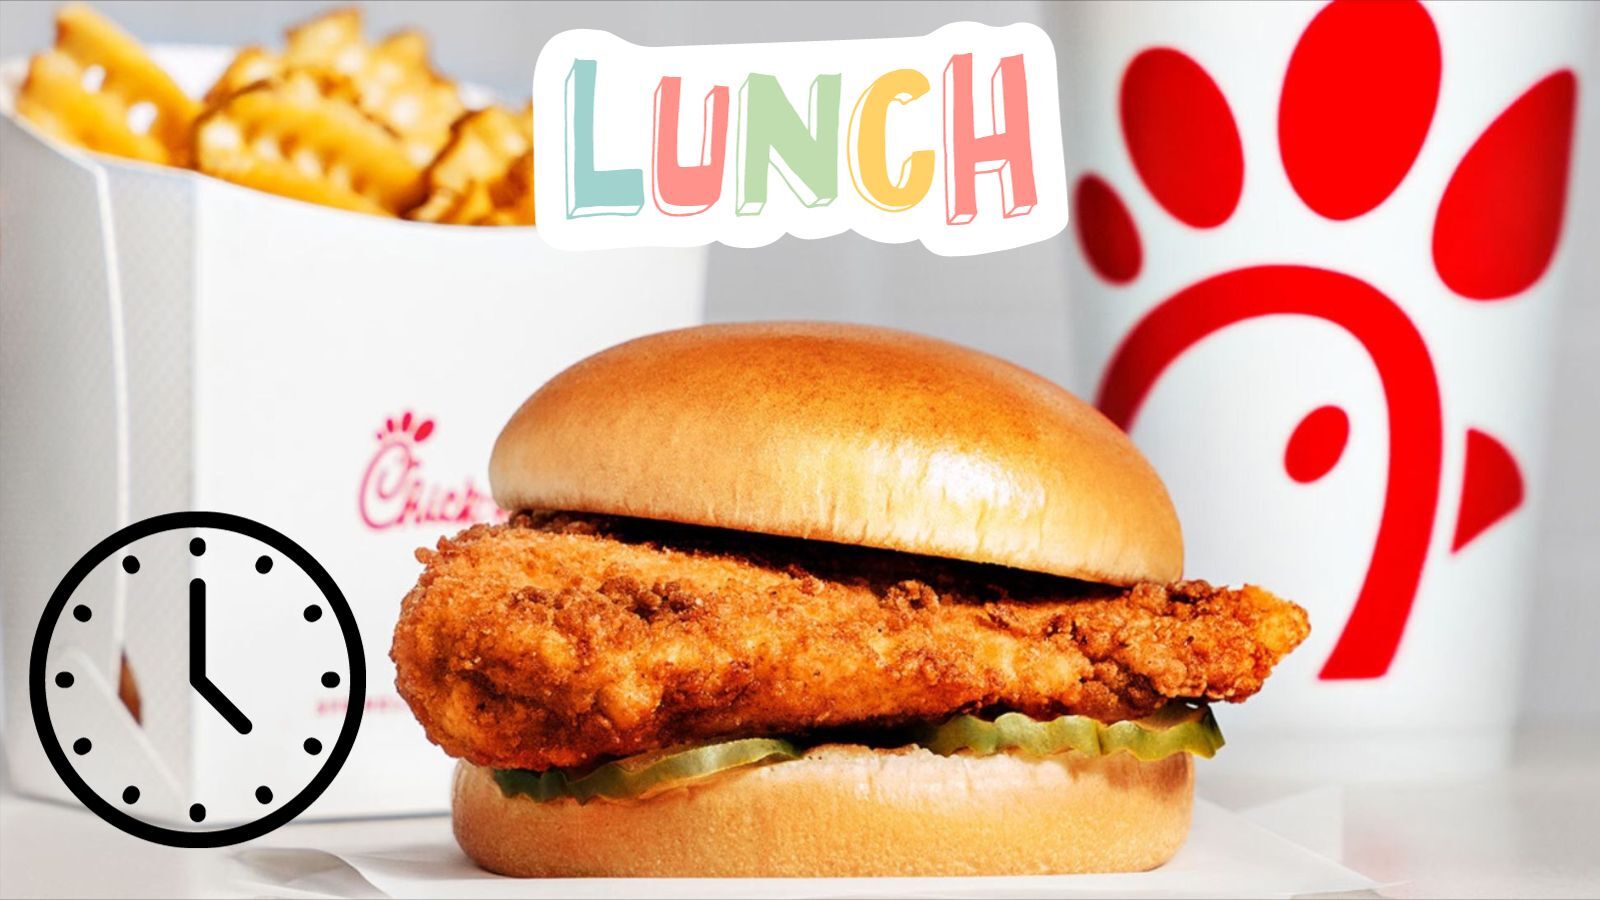 Does Chick-fil-A Serve Lunch All Day? (The Most Popular Menu)